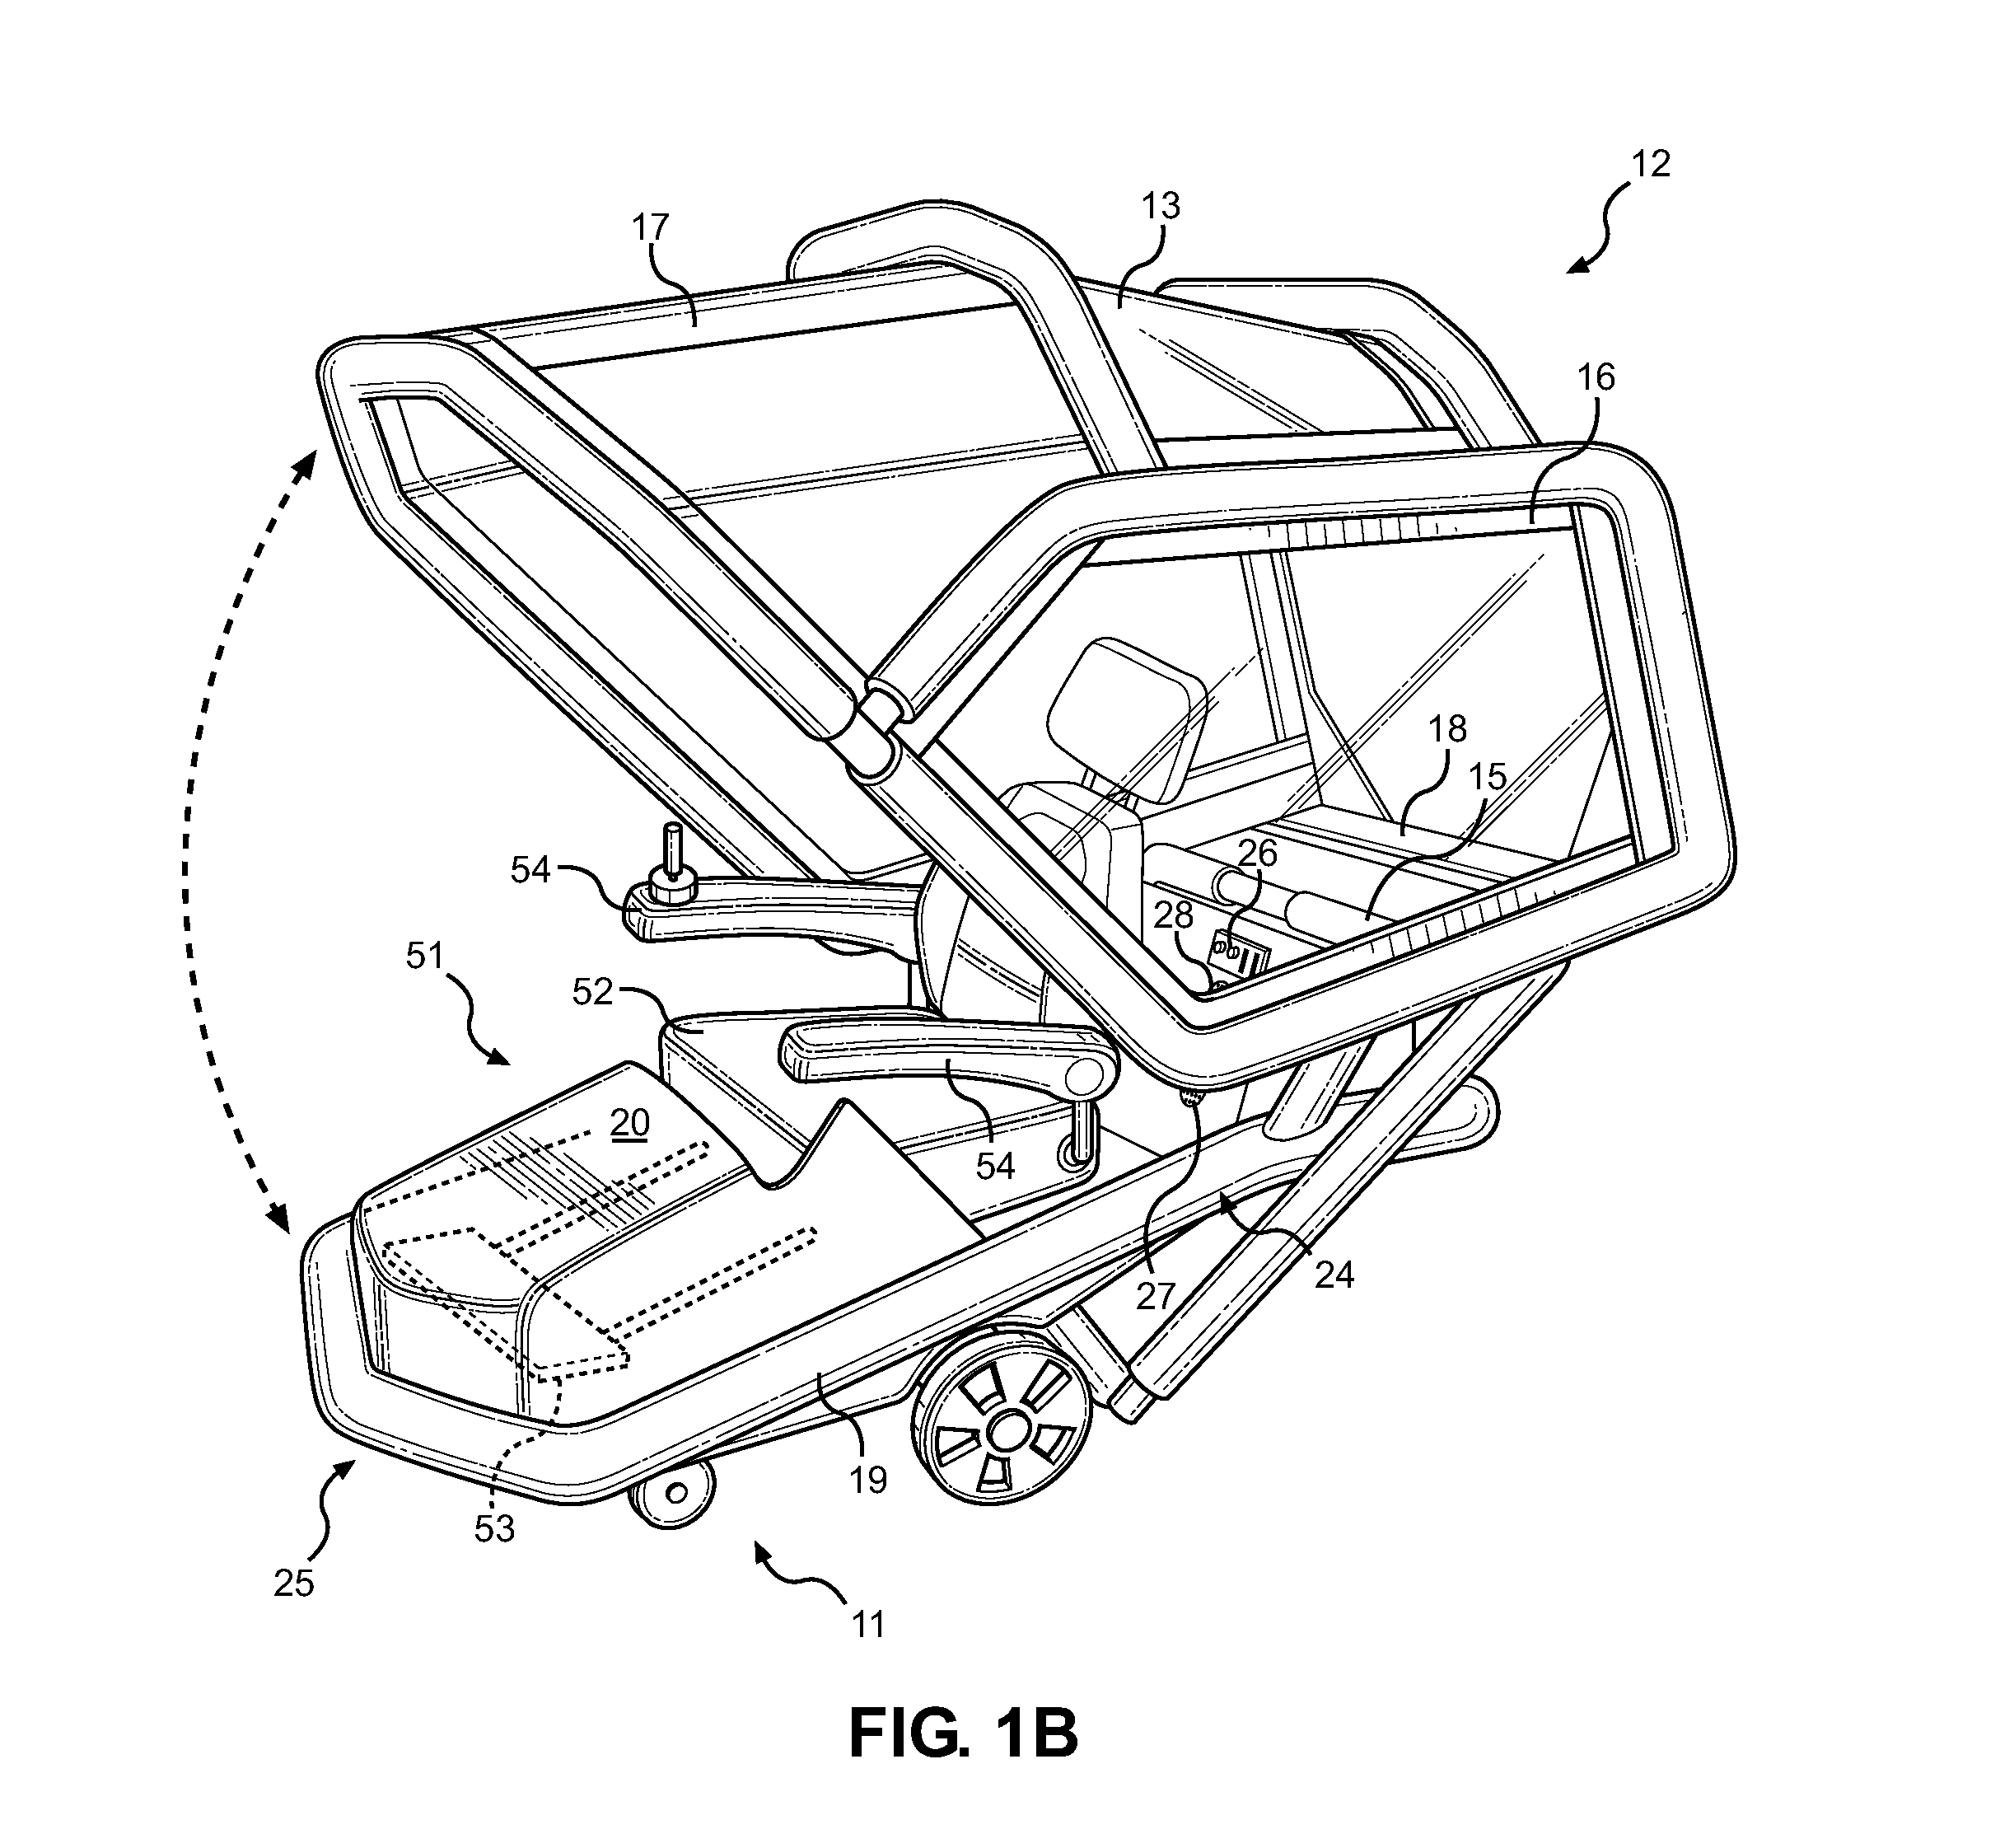 Temperature-Controlled Personal Mobility Device Enclosure